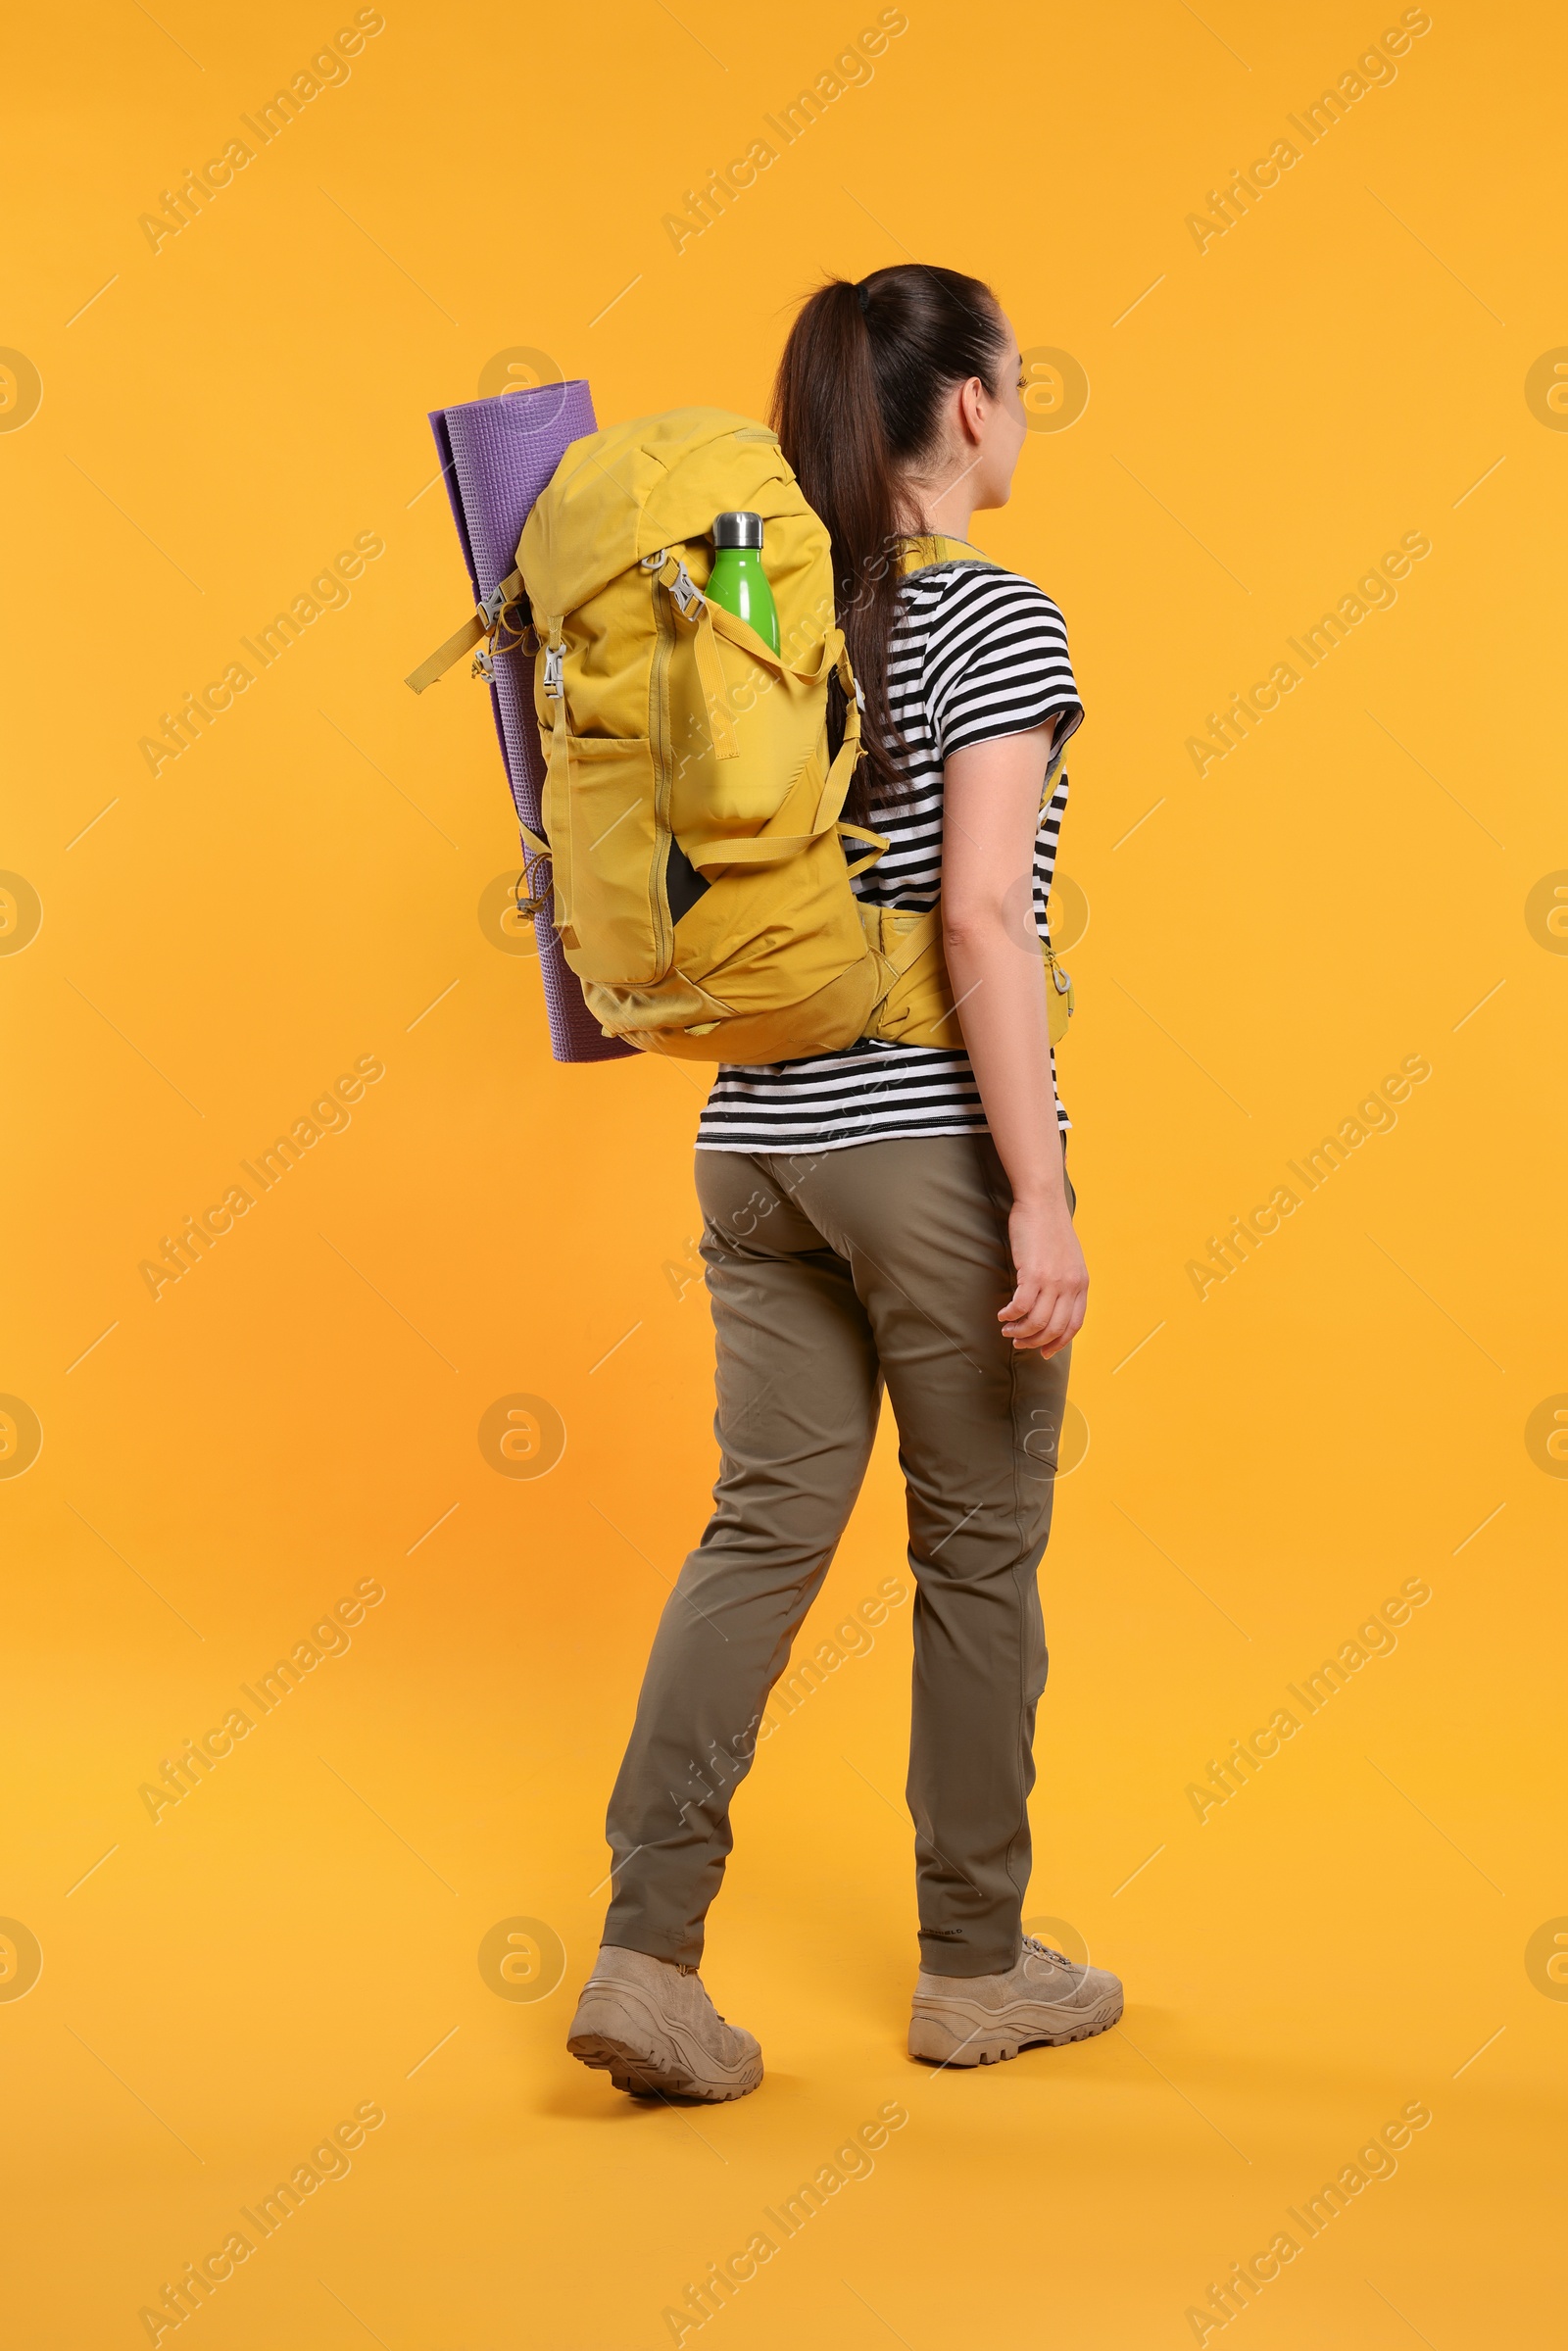 Photo of Woman with backpack walking on orange background. Active tourism